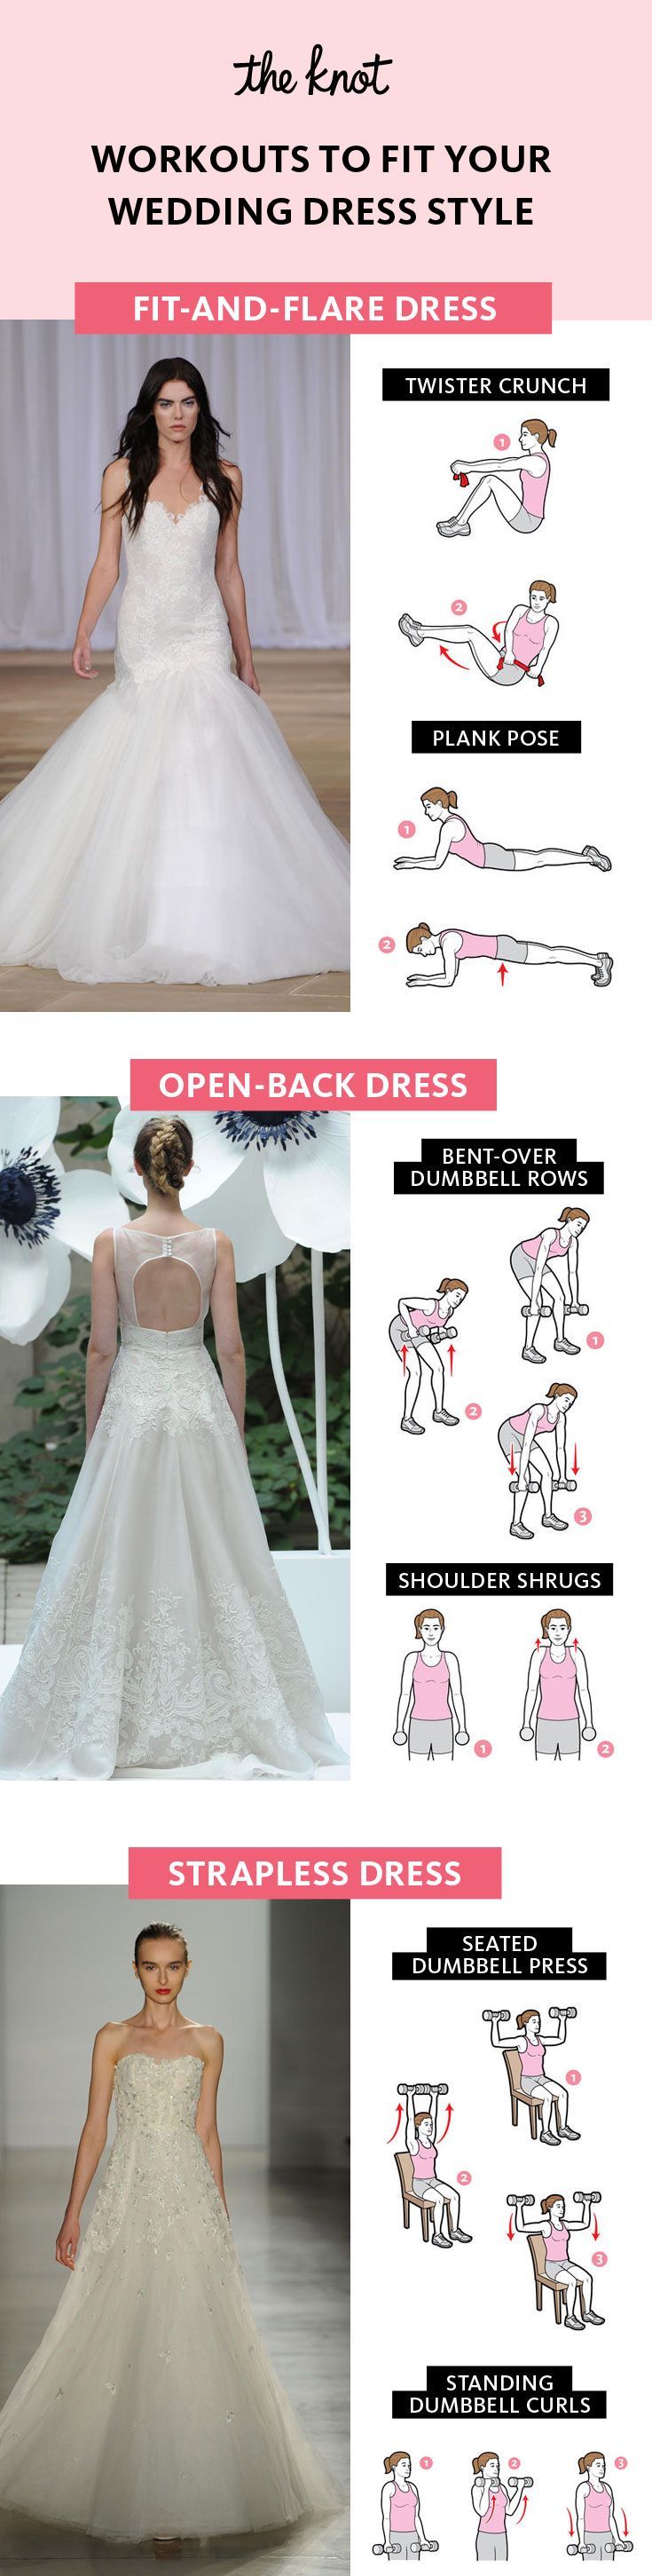 6 Fitness Workouts to Fit Your Wedding Dress Style |